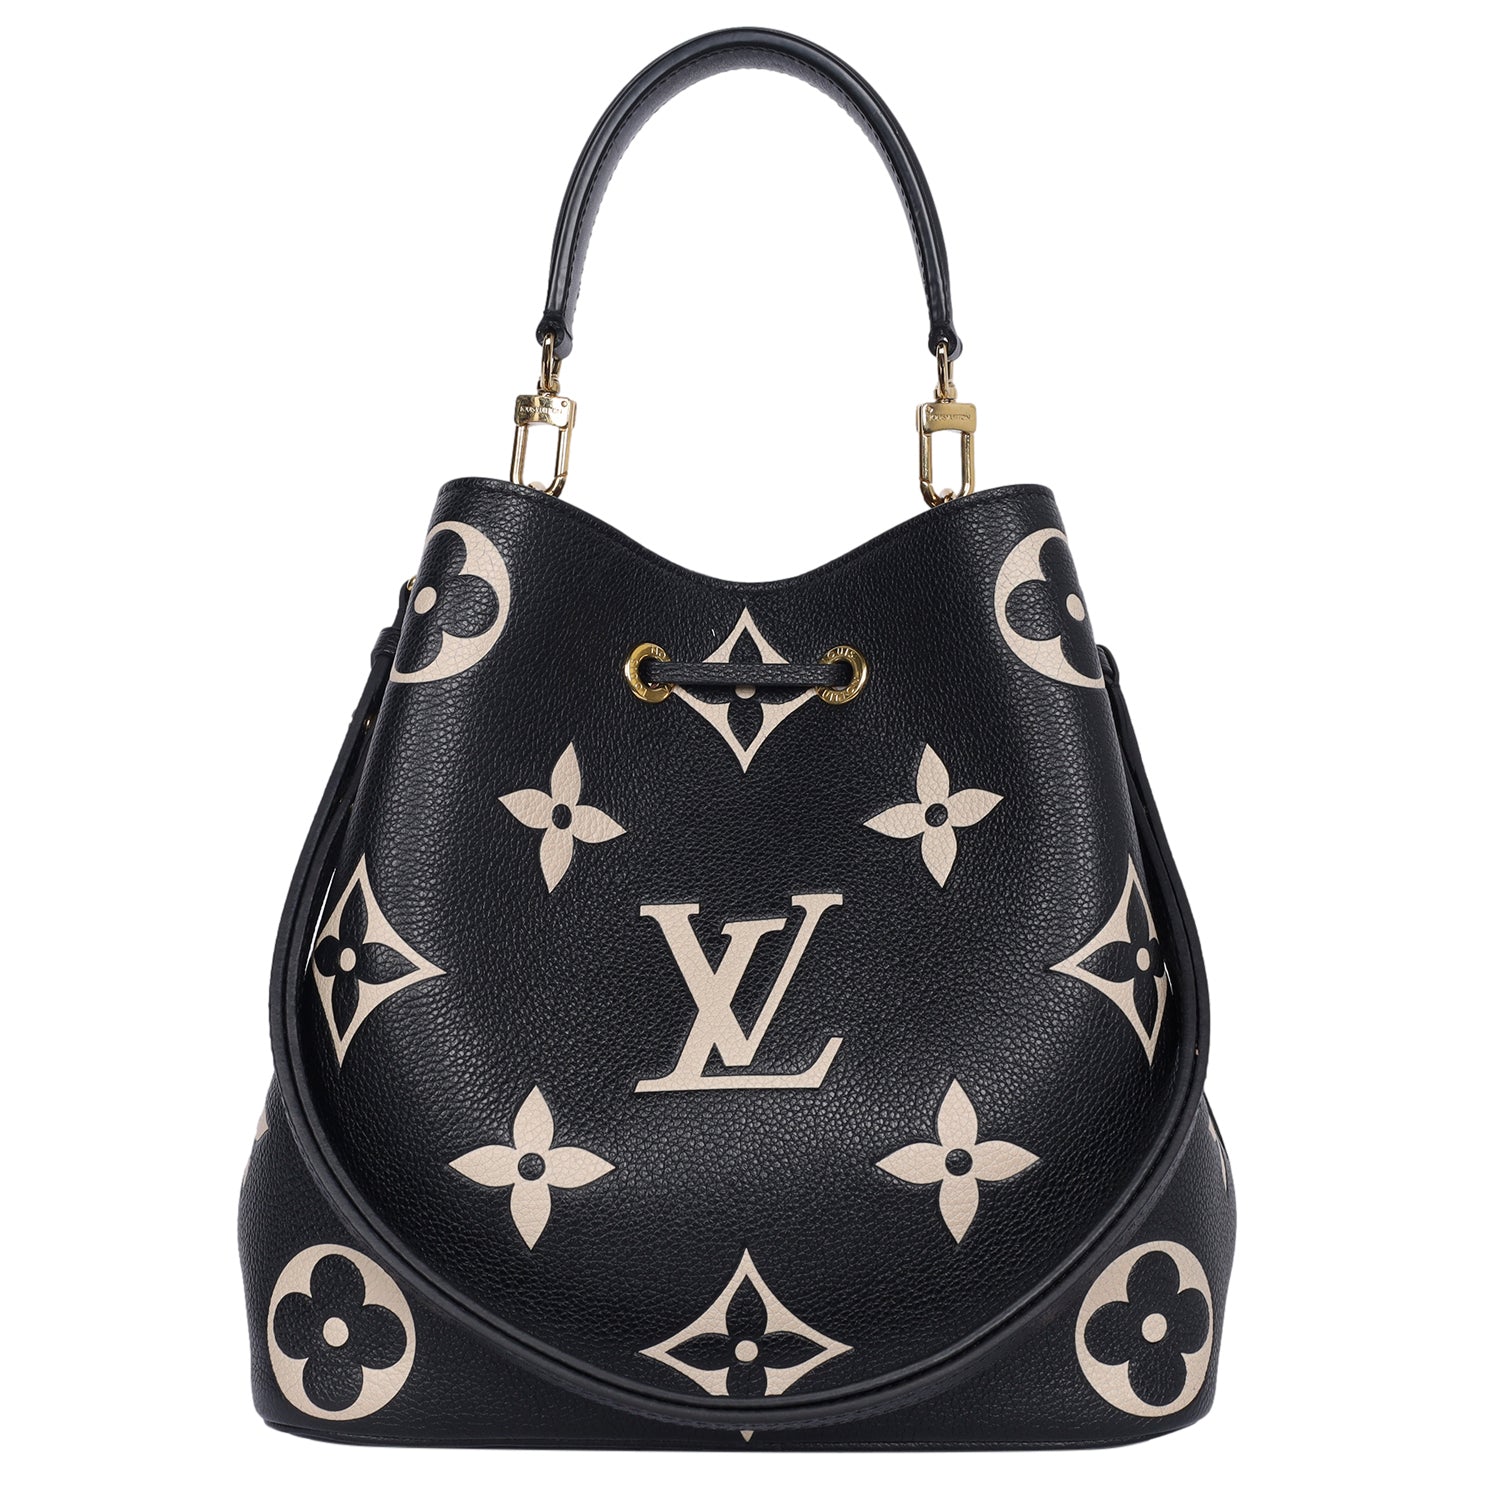 If you shop at SoHo you know the feeling! $545 LV EPI Leather